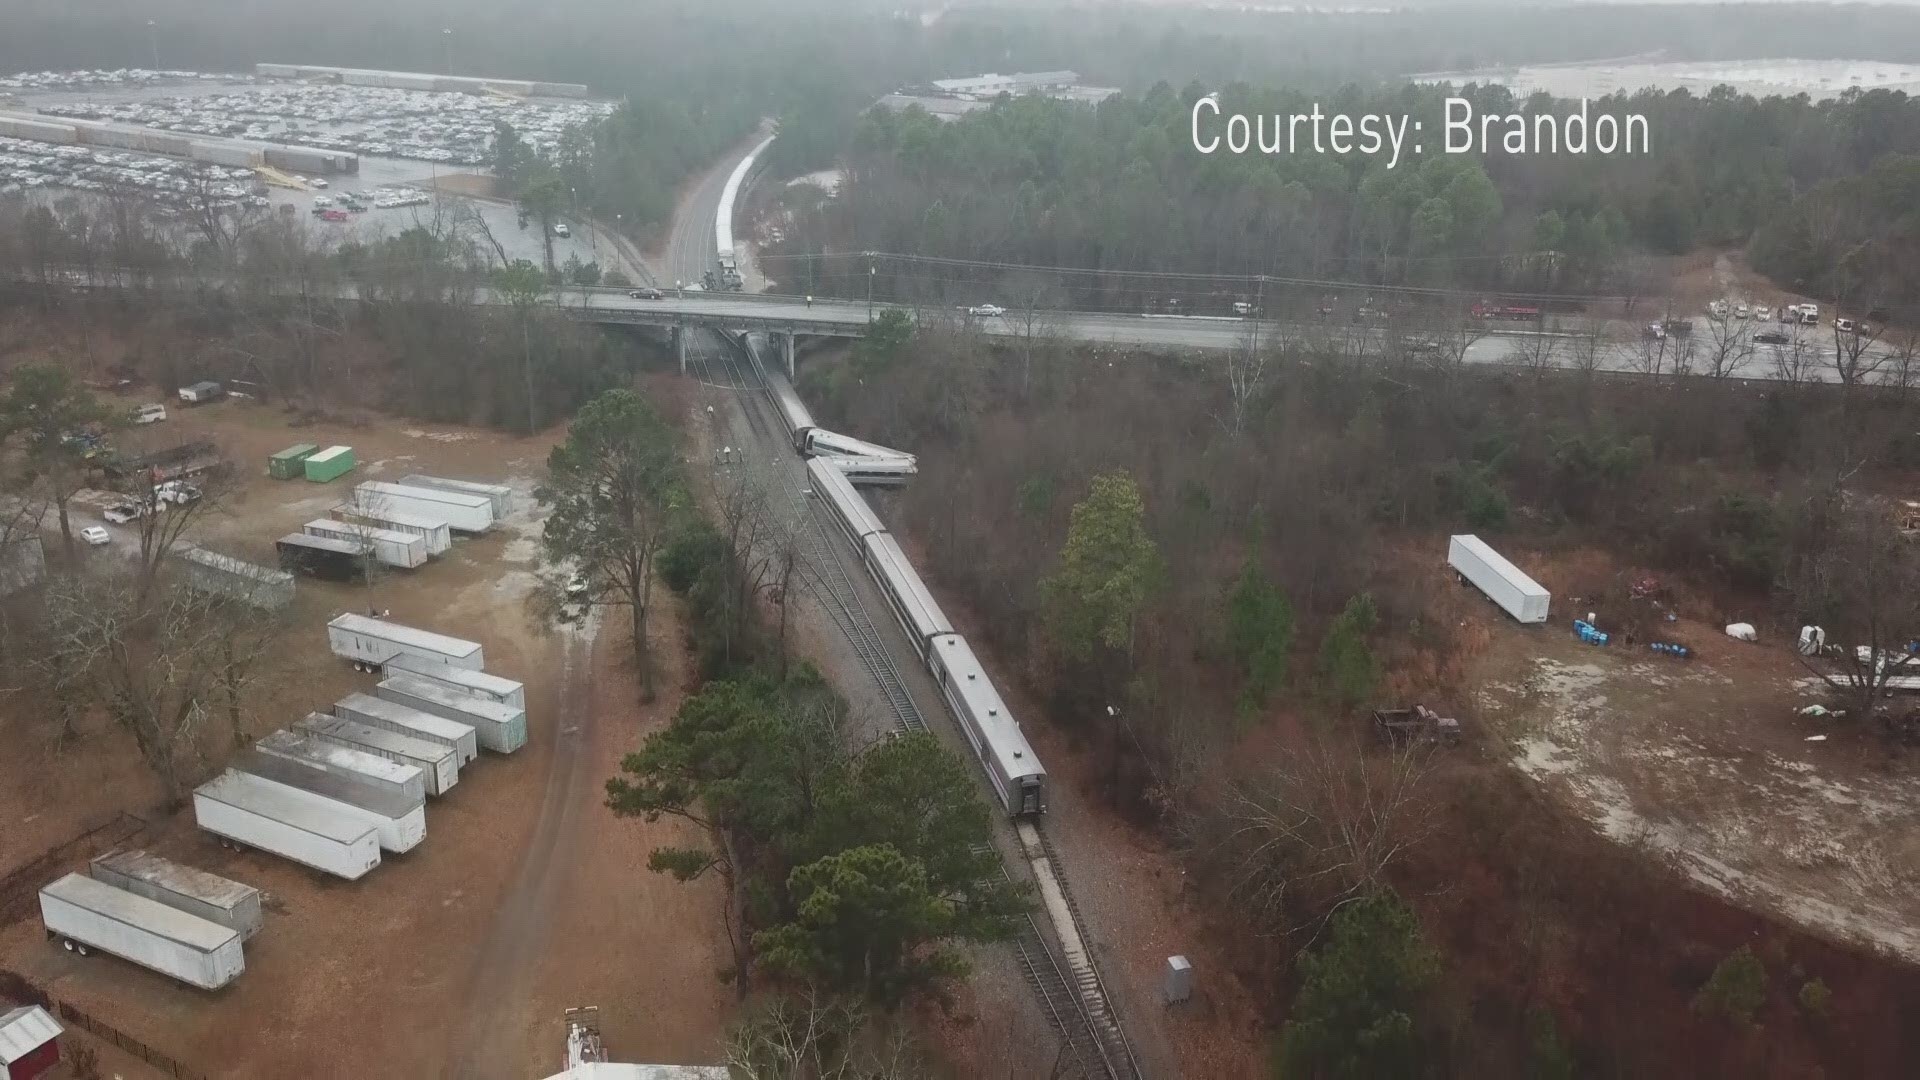 Drone video shows the extent of the damage caused after an Amtrak train collided with a freight train.